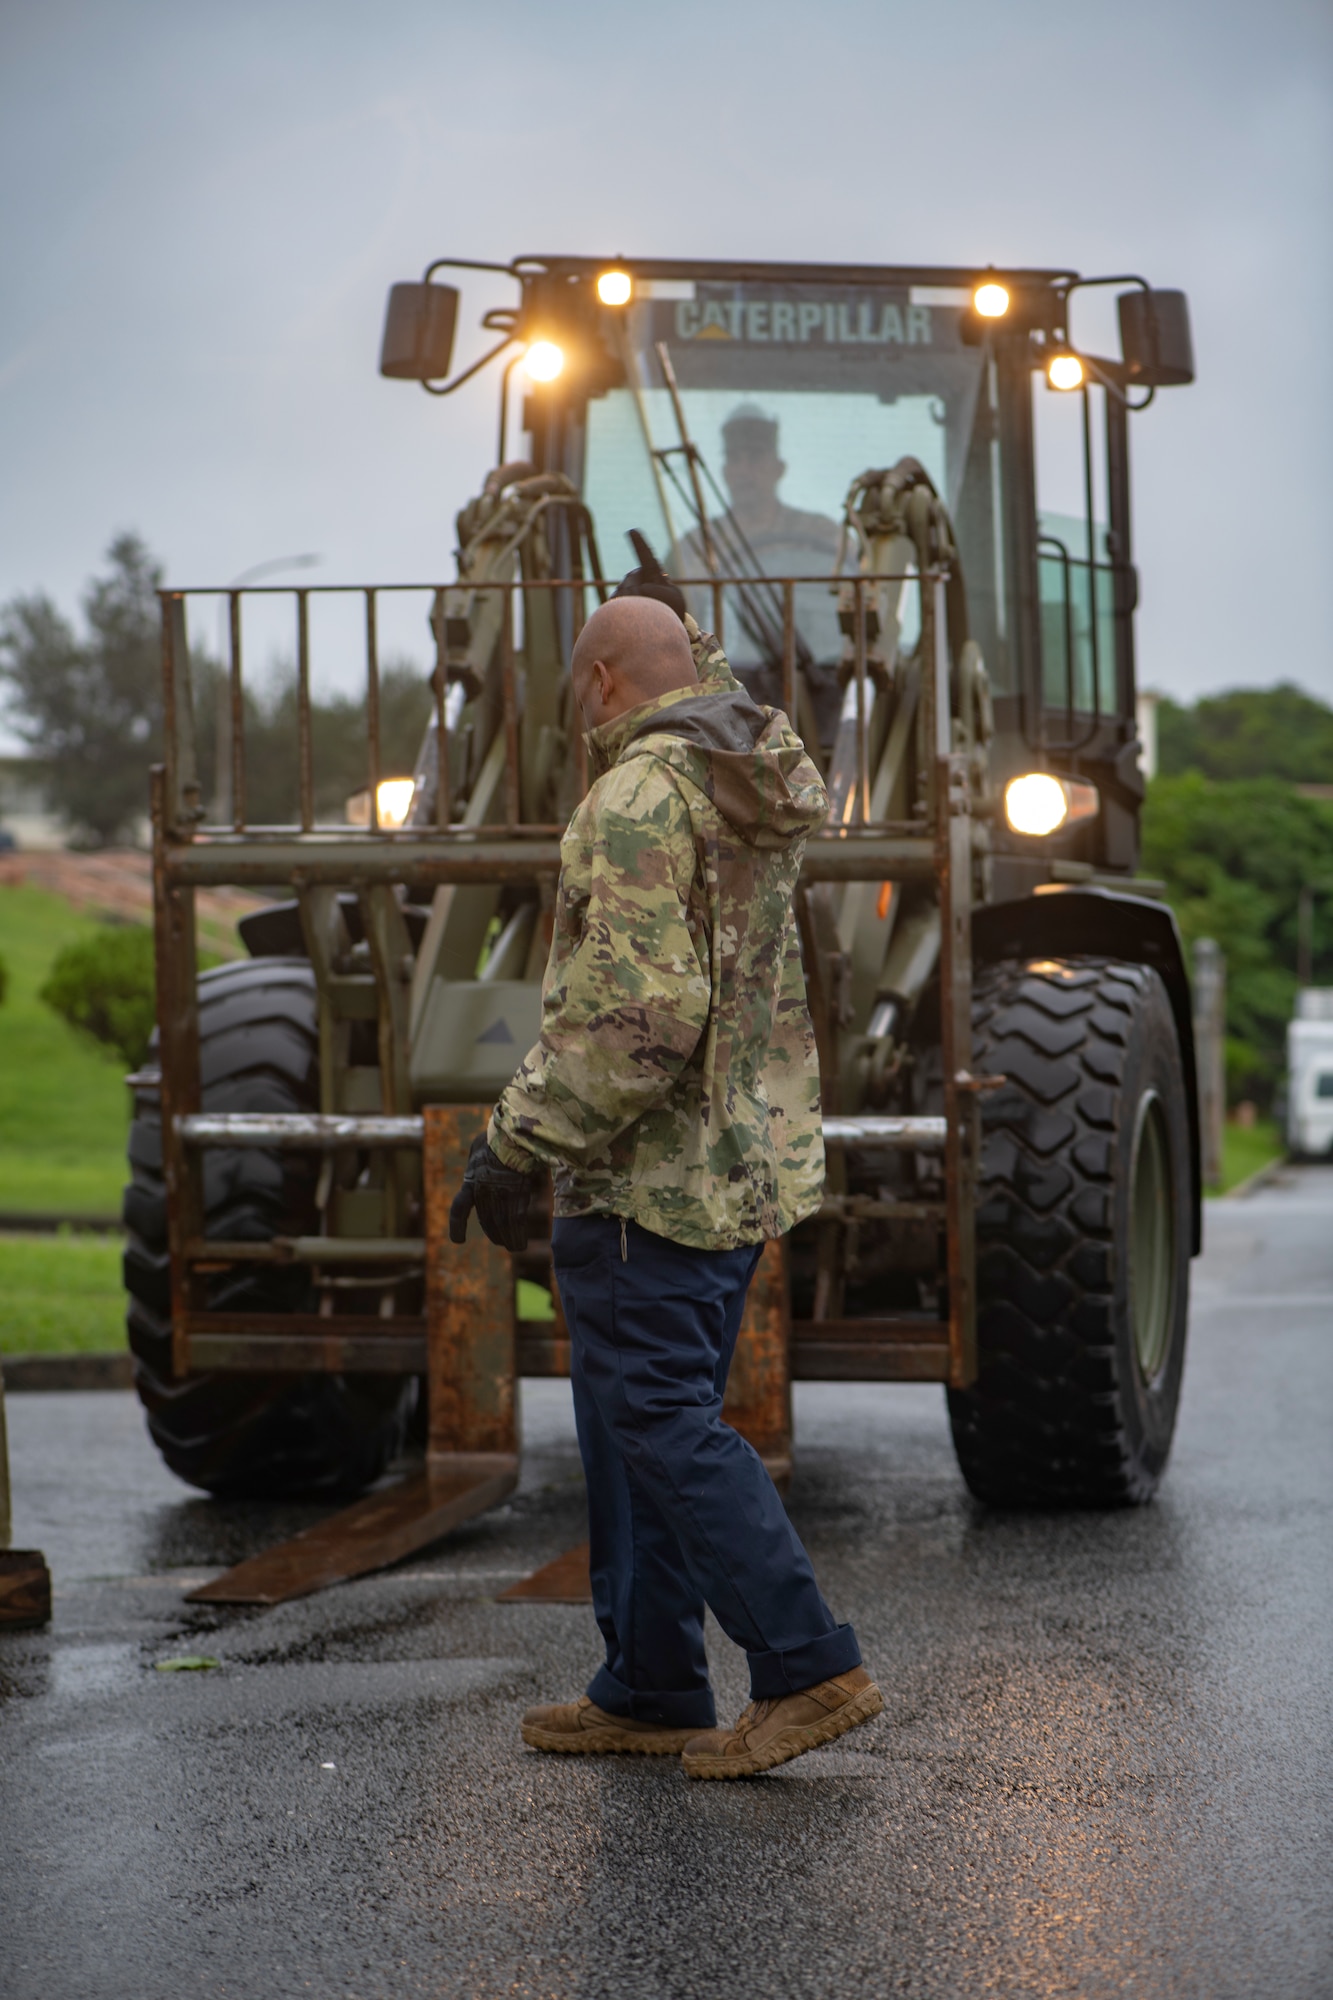 U.S. Air Force Tech. Sgt. Jerome Fontenot directs a forklift to pick up cinder blocks used for securing tents